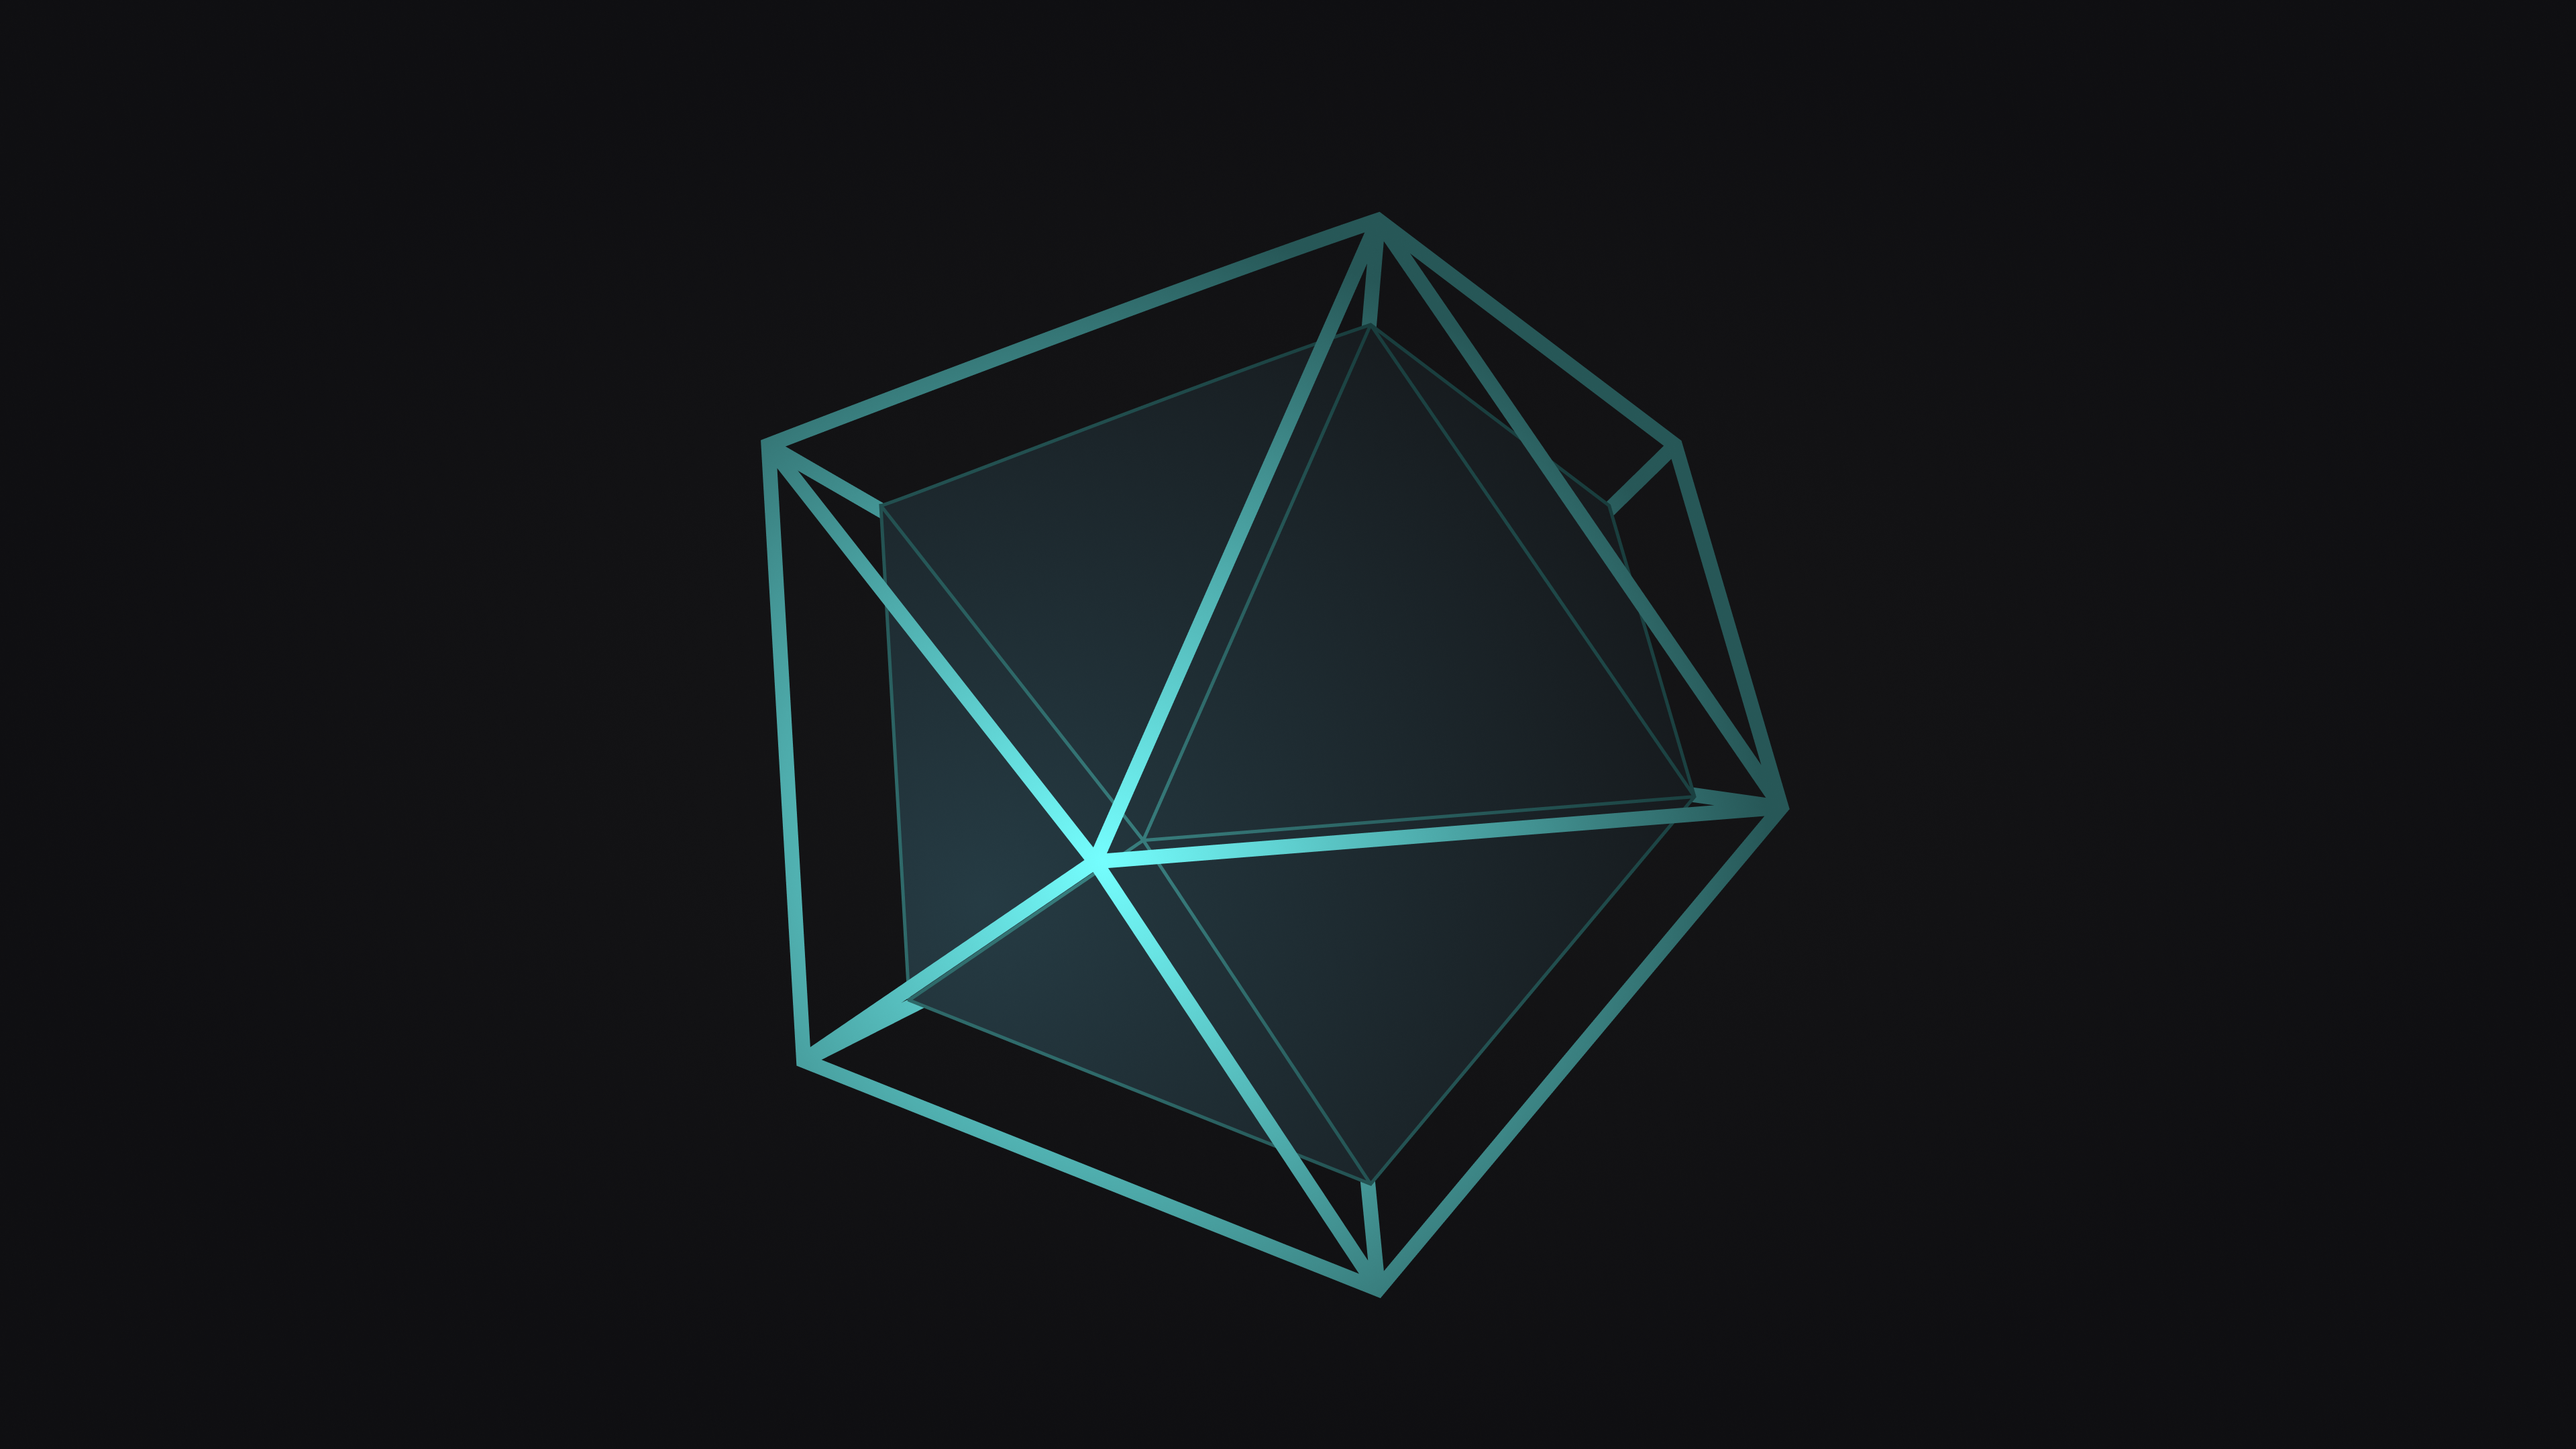 Poly Polygon Art 3D Abstract Abstract Shapes Outline 3840x2160